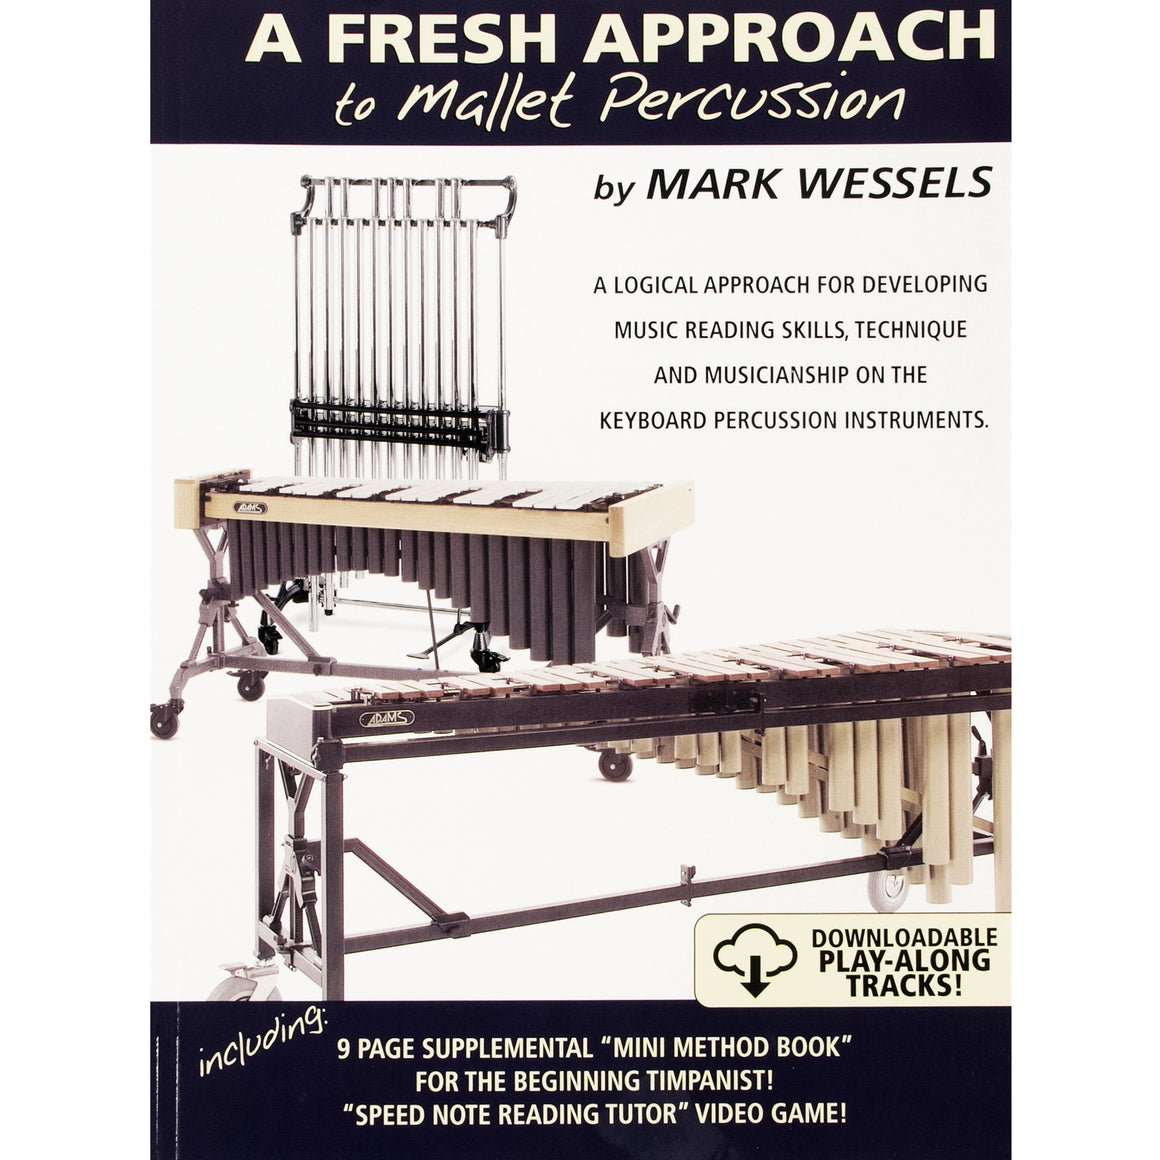 WESSELS PUBLIS FATMP Fresh Approach to Mallet Percussion